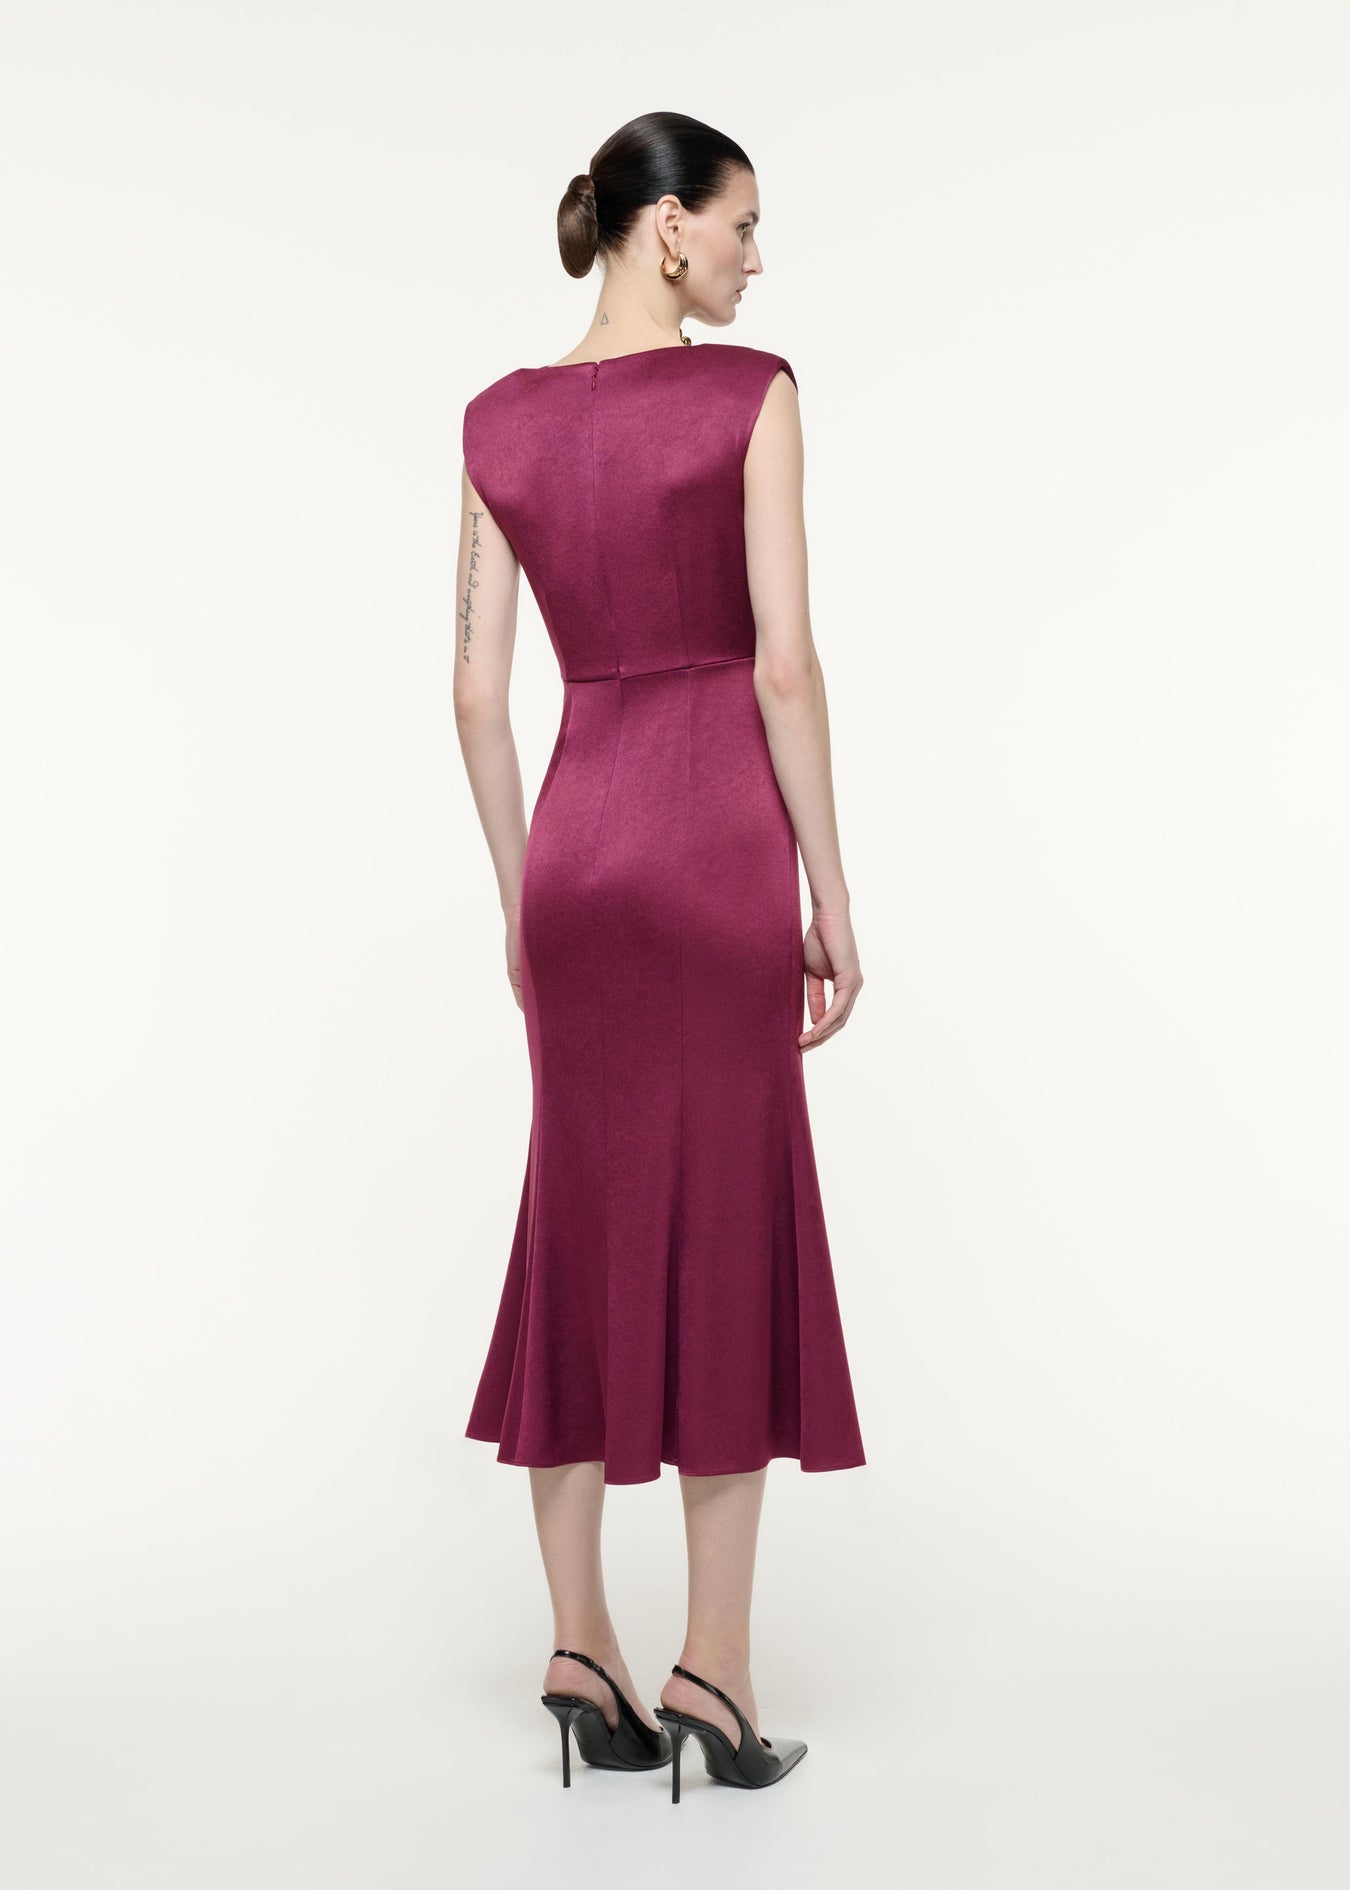 A back view image of a model wearing the Satin Crepe Midi Dress Purple in Purple